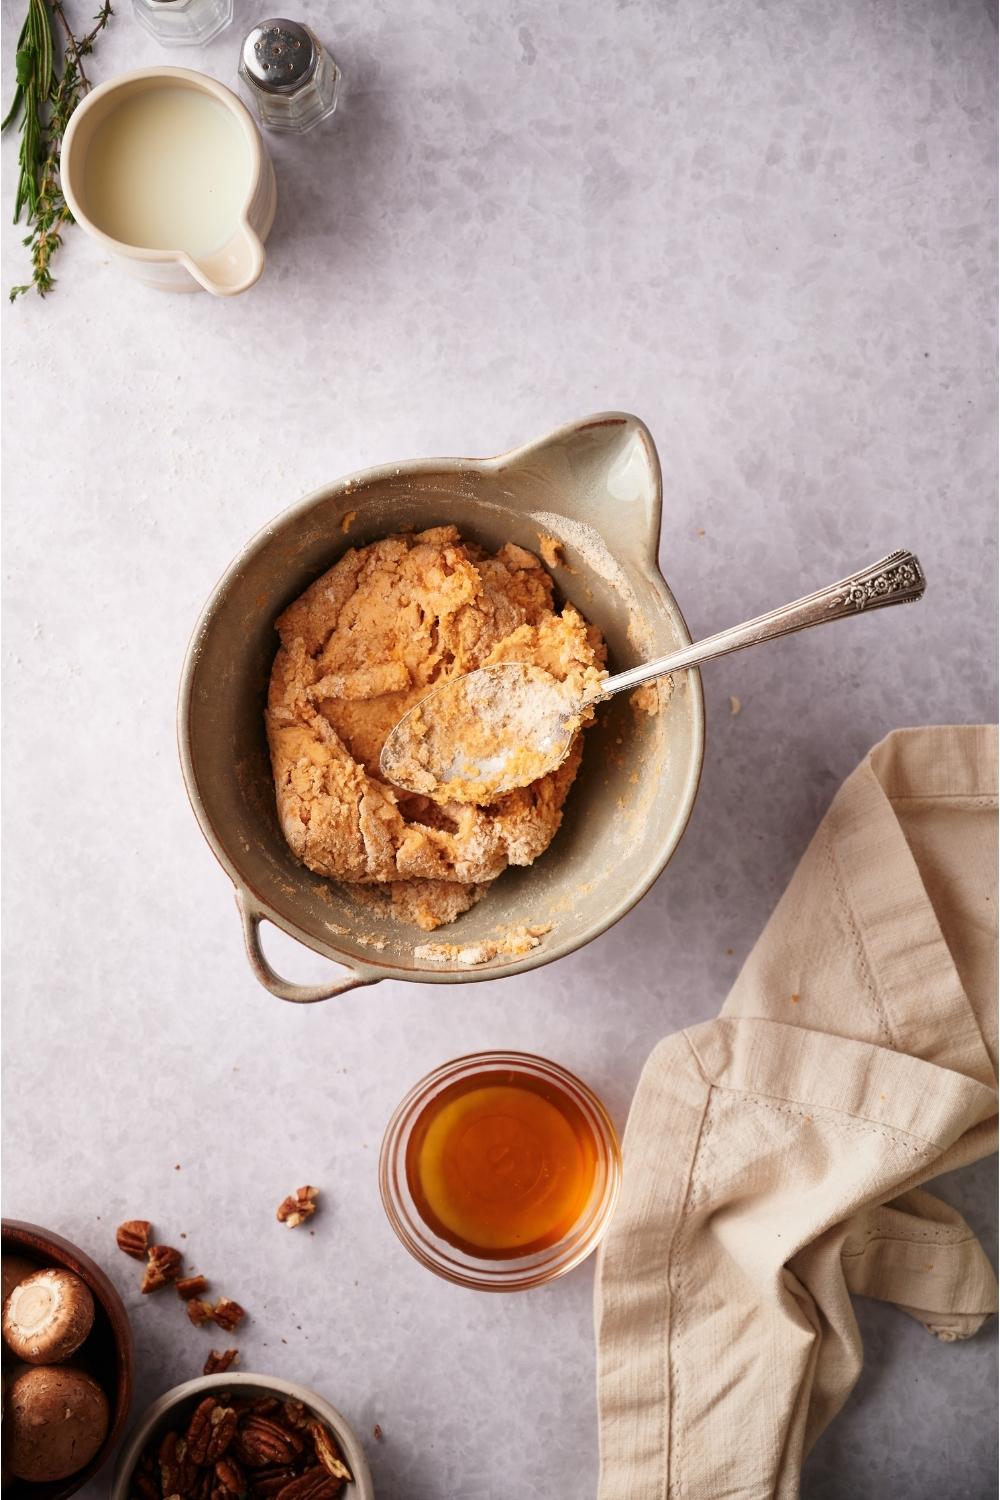 A large mixing bowl of biscuit dough with a spoon in the bowl next to a small bowl of maple syrup.